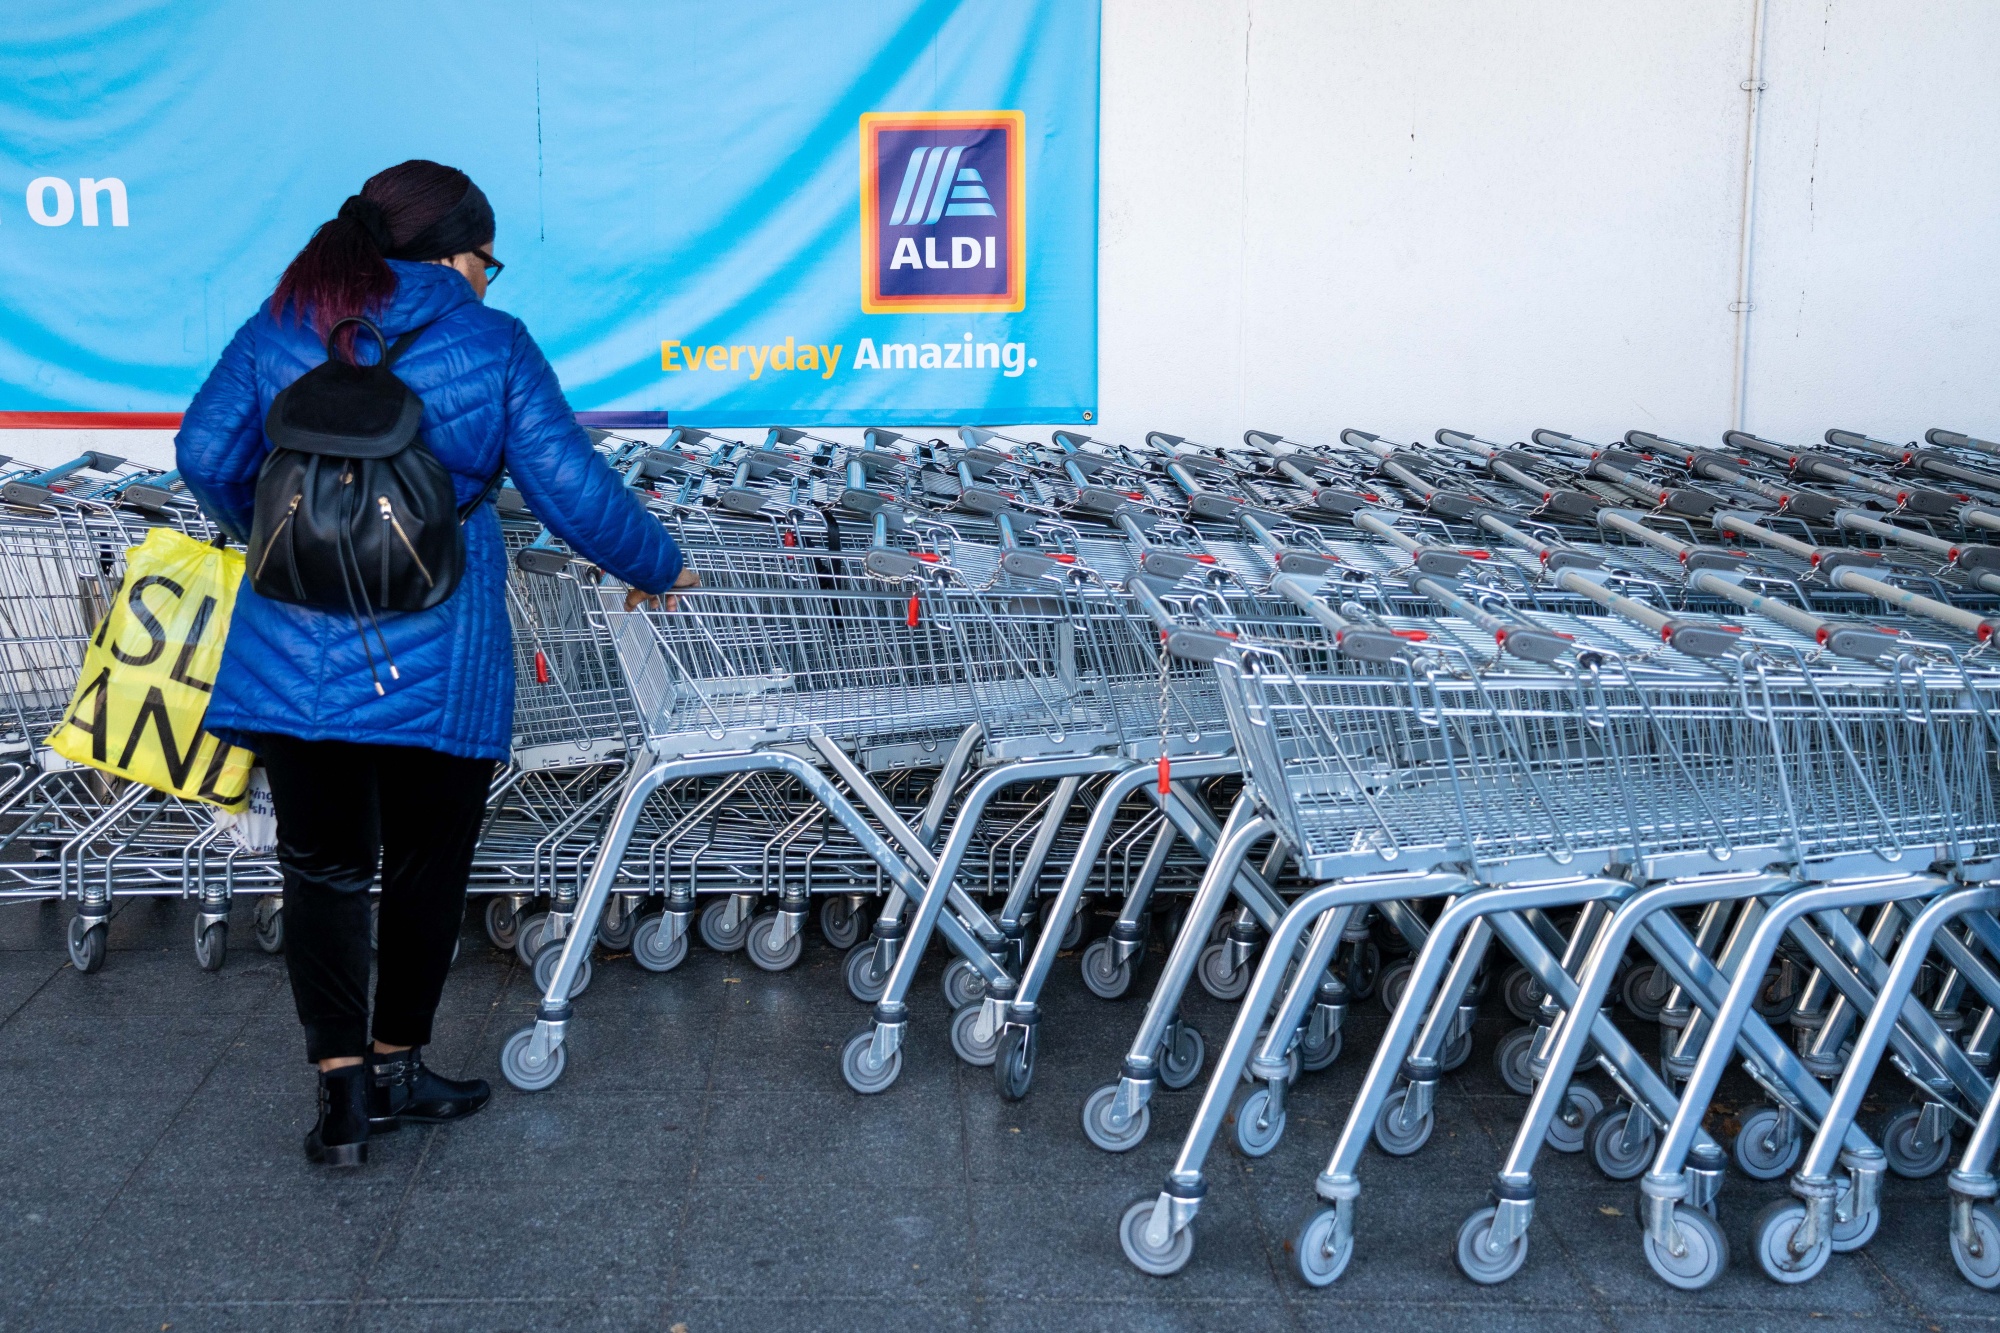 Lidl sneakers sell out reaching record price - Wanted in Europe in